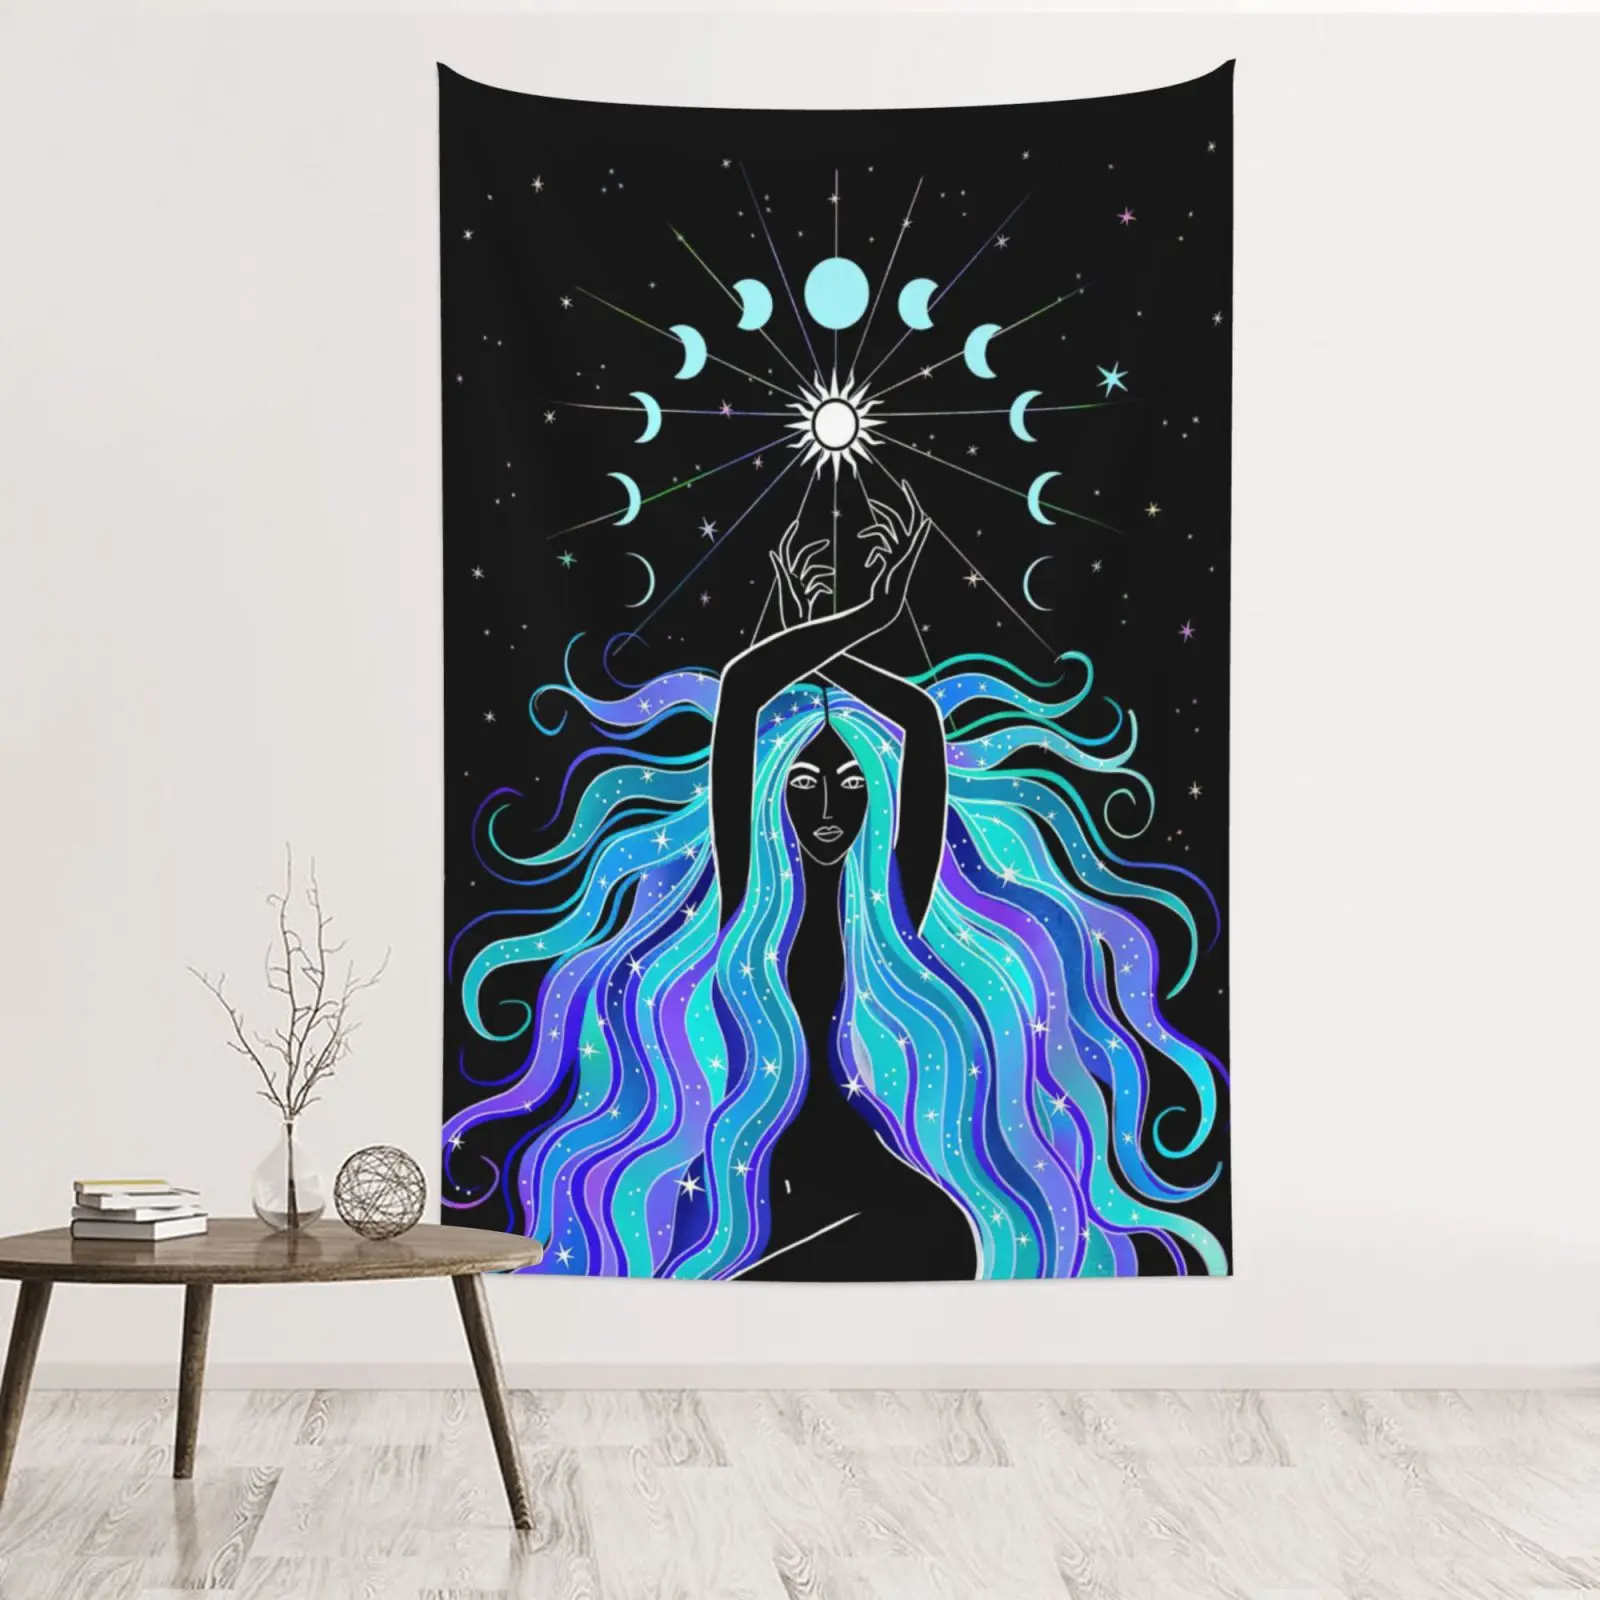 

Indian Moon Phase Girl Mandala Tapestry Wall Hanging Boho Psychedelic Bedroom Girl's Kawaii Room Dorm Hippie Witchcraft Decor